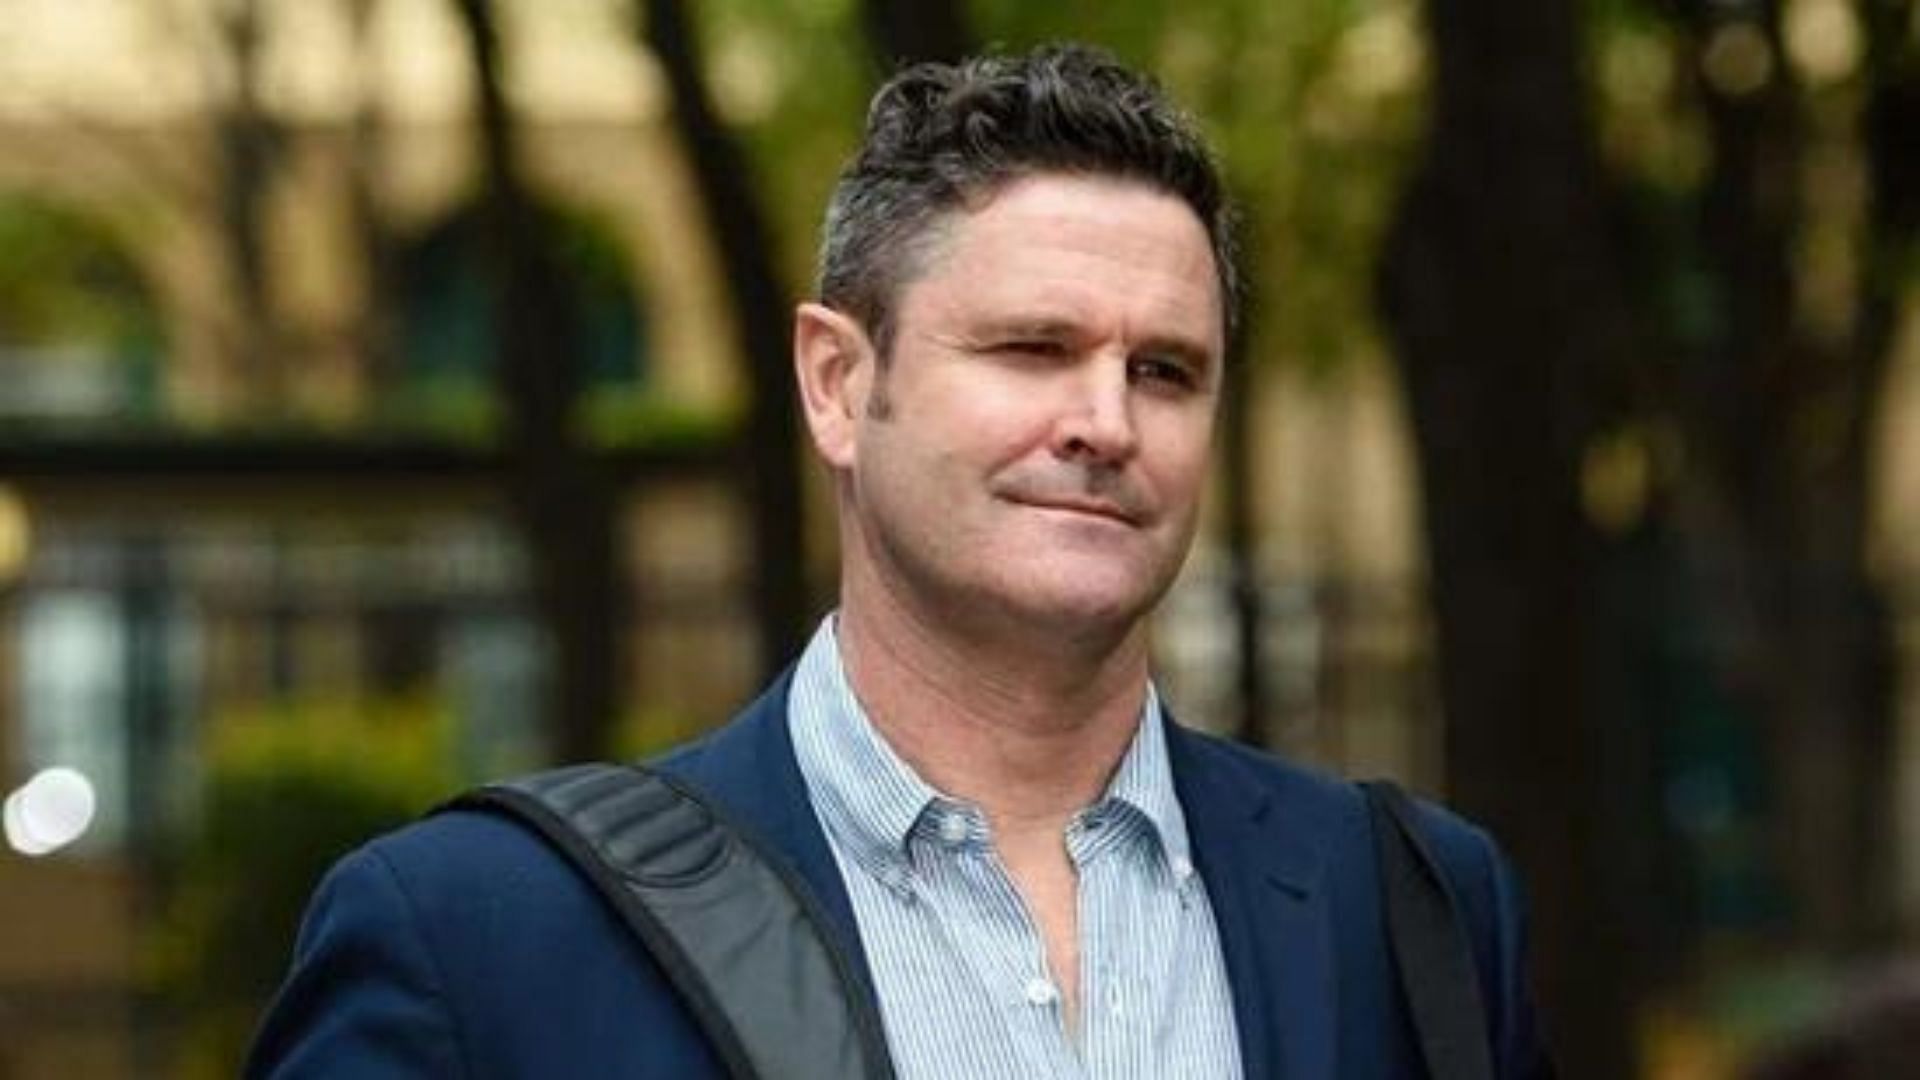 Chris Cairns recalled the difficulties he went through after being accused of match-fixing. (P.C.: Twitter)